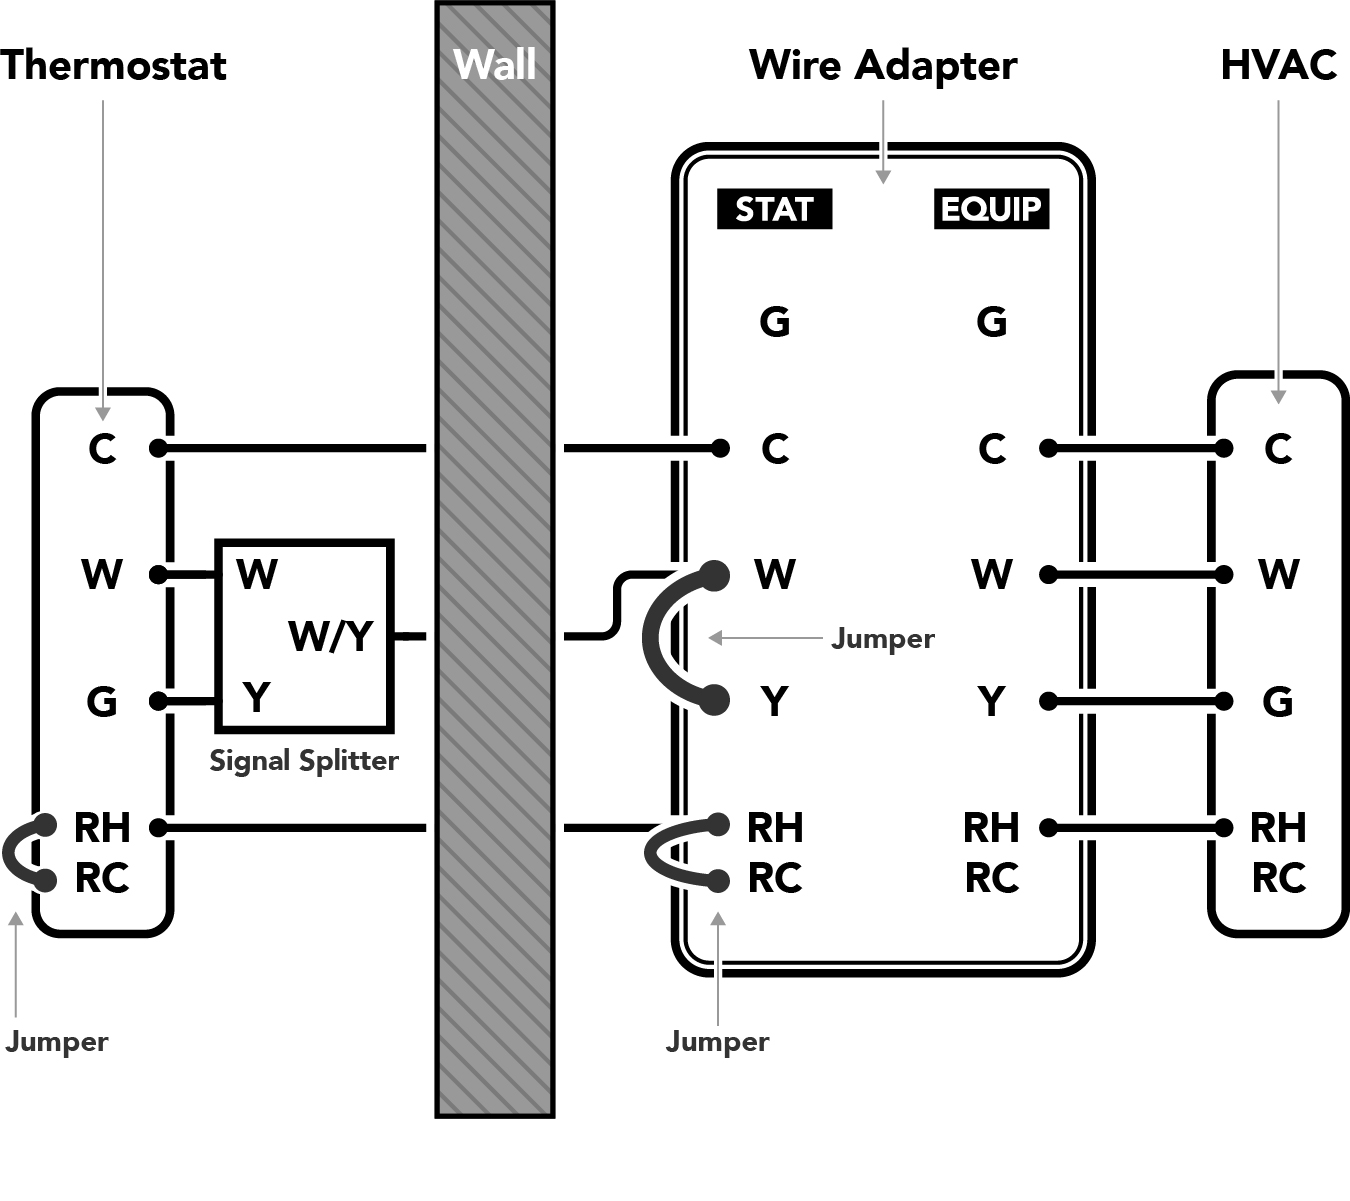 Diagram-03_Conventional-Heat-and-Fan_2015-11-18_V1_Conventional_Heat-and-AC_4-Wires_copy_2.jpg